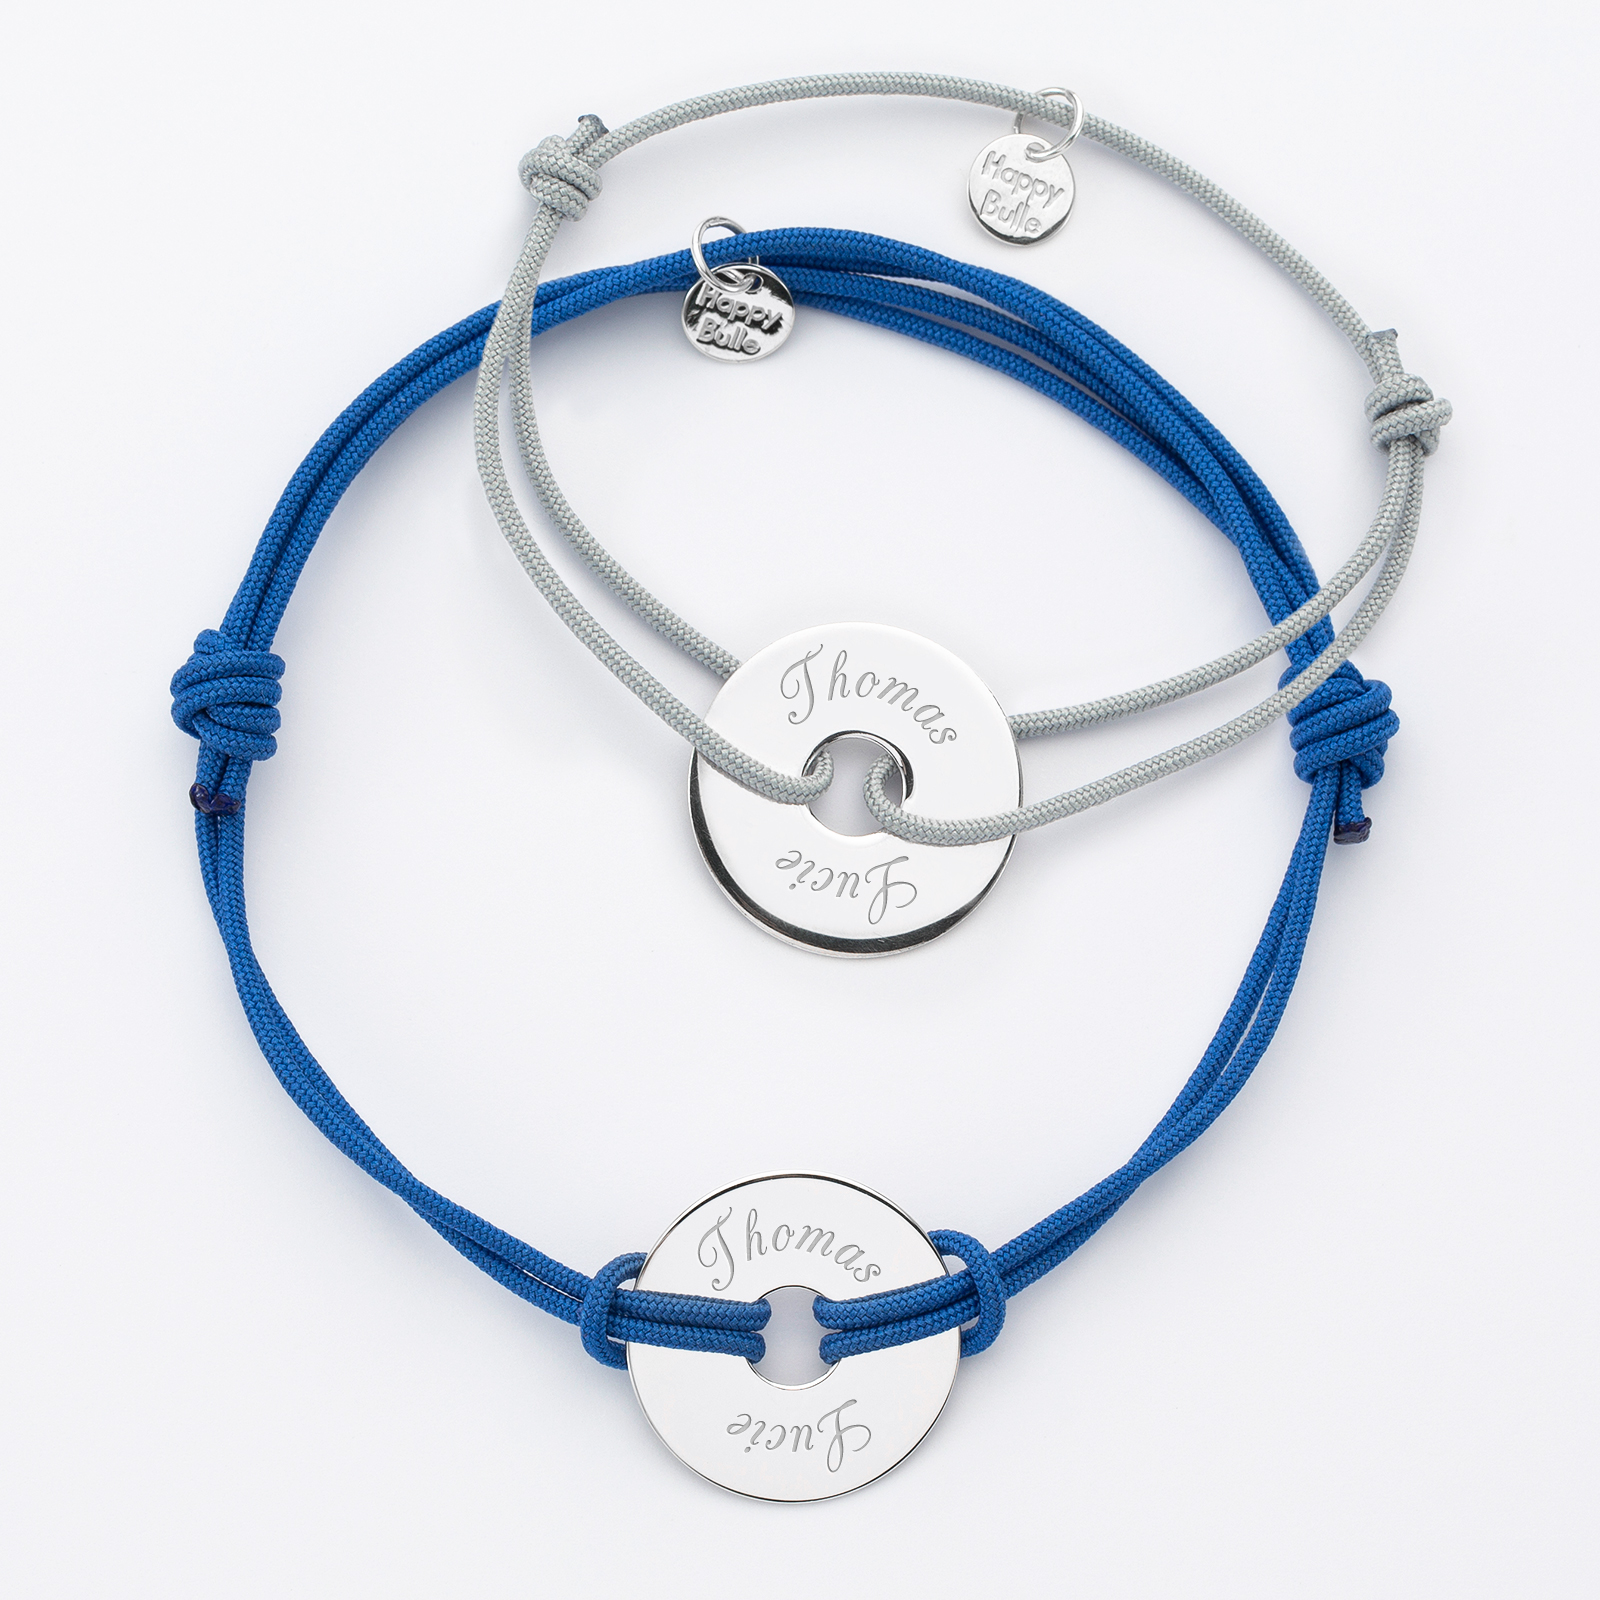 Pair of personalised bracelets with engraved target silver medallions 20mm